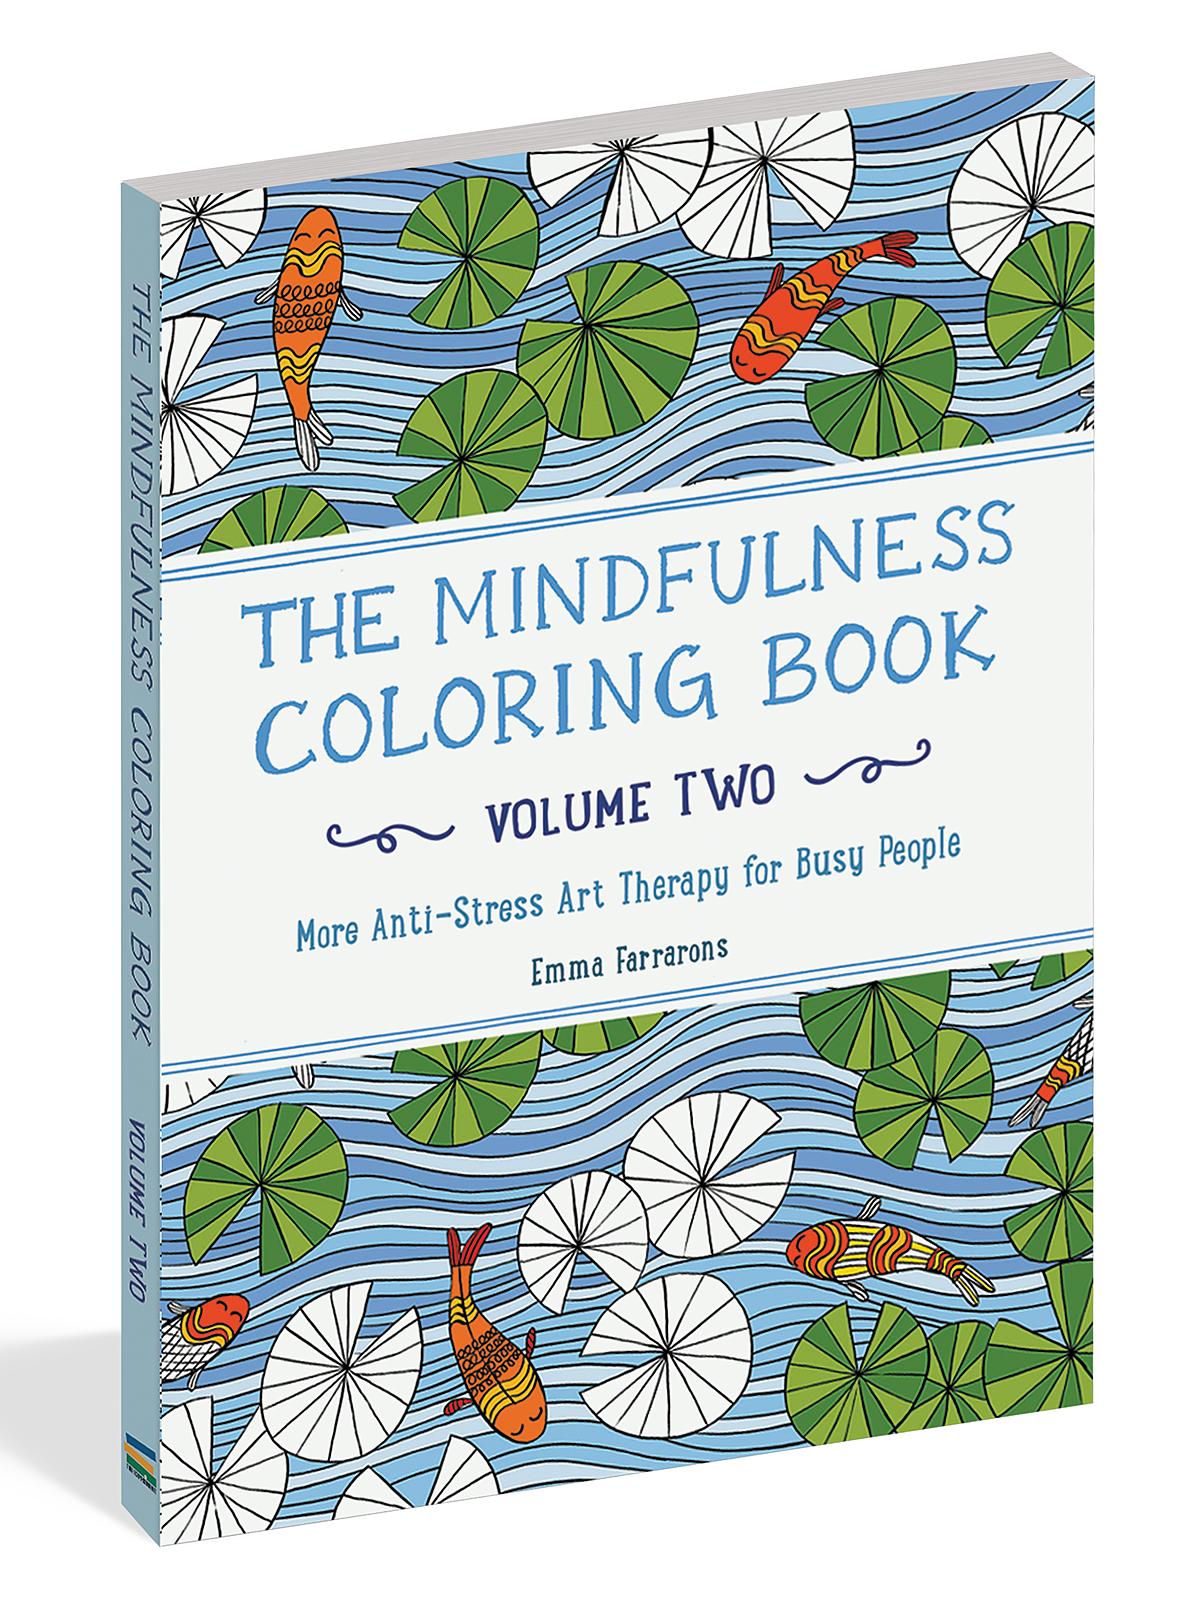 The Mindfulness Coloring Book Volume 2